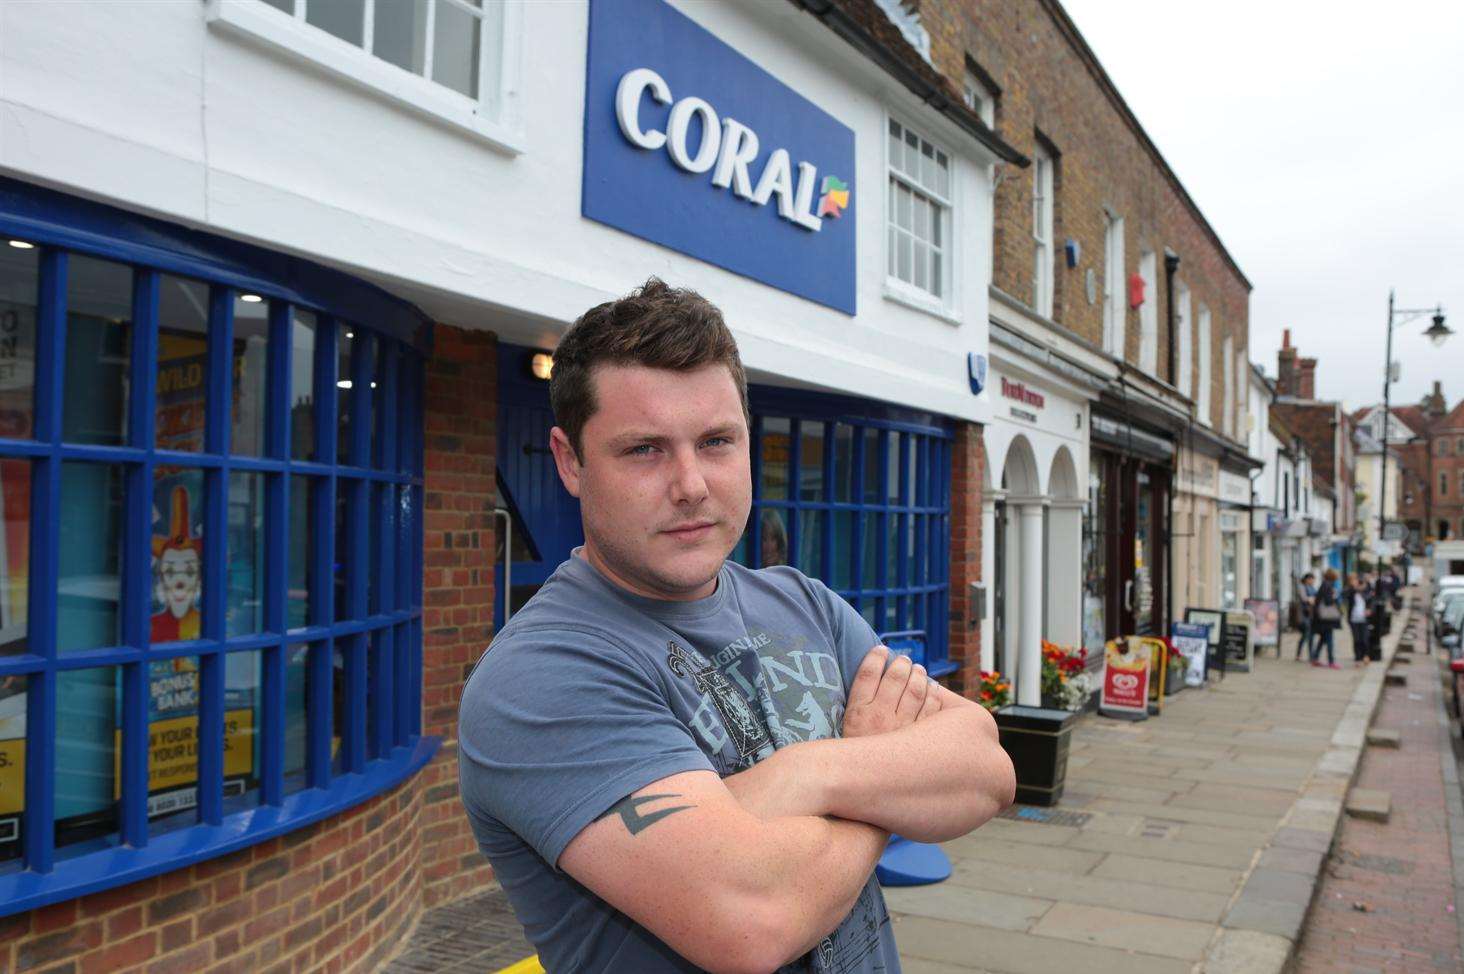 Ben Peirce signed the petition to remove the Coral Bookmakers from Cranbrook high street